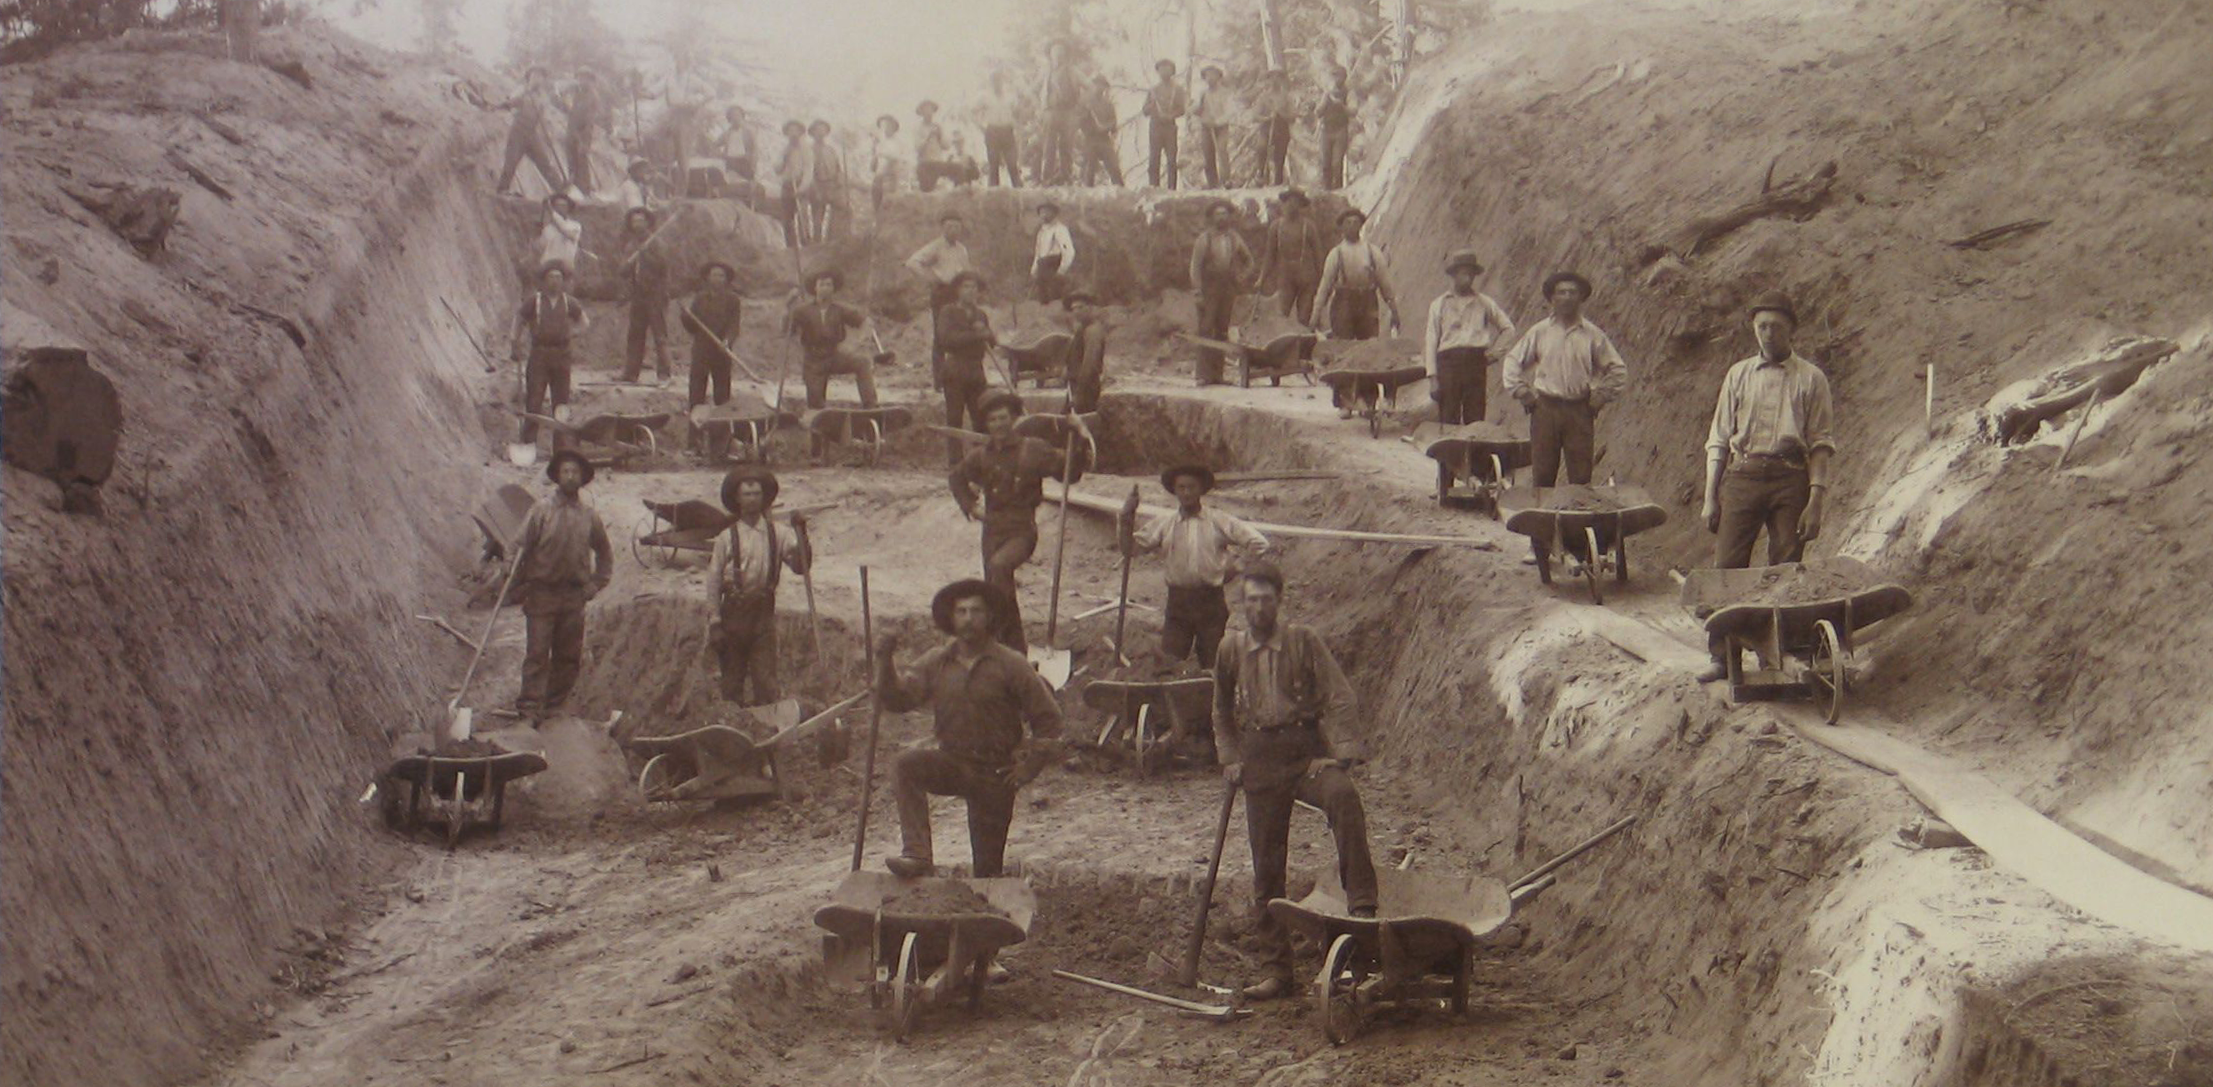 A historic black and white photo showing more than two dozen men with wheelbarrows and shovels standing in a road cut through a hill in the forest